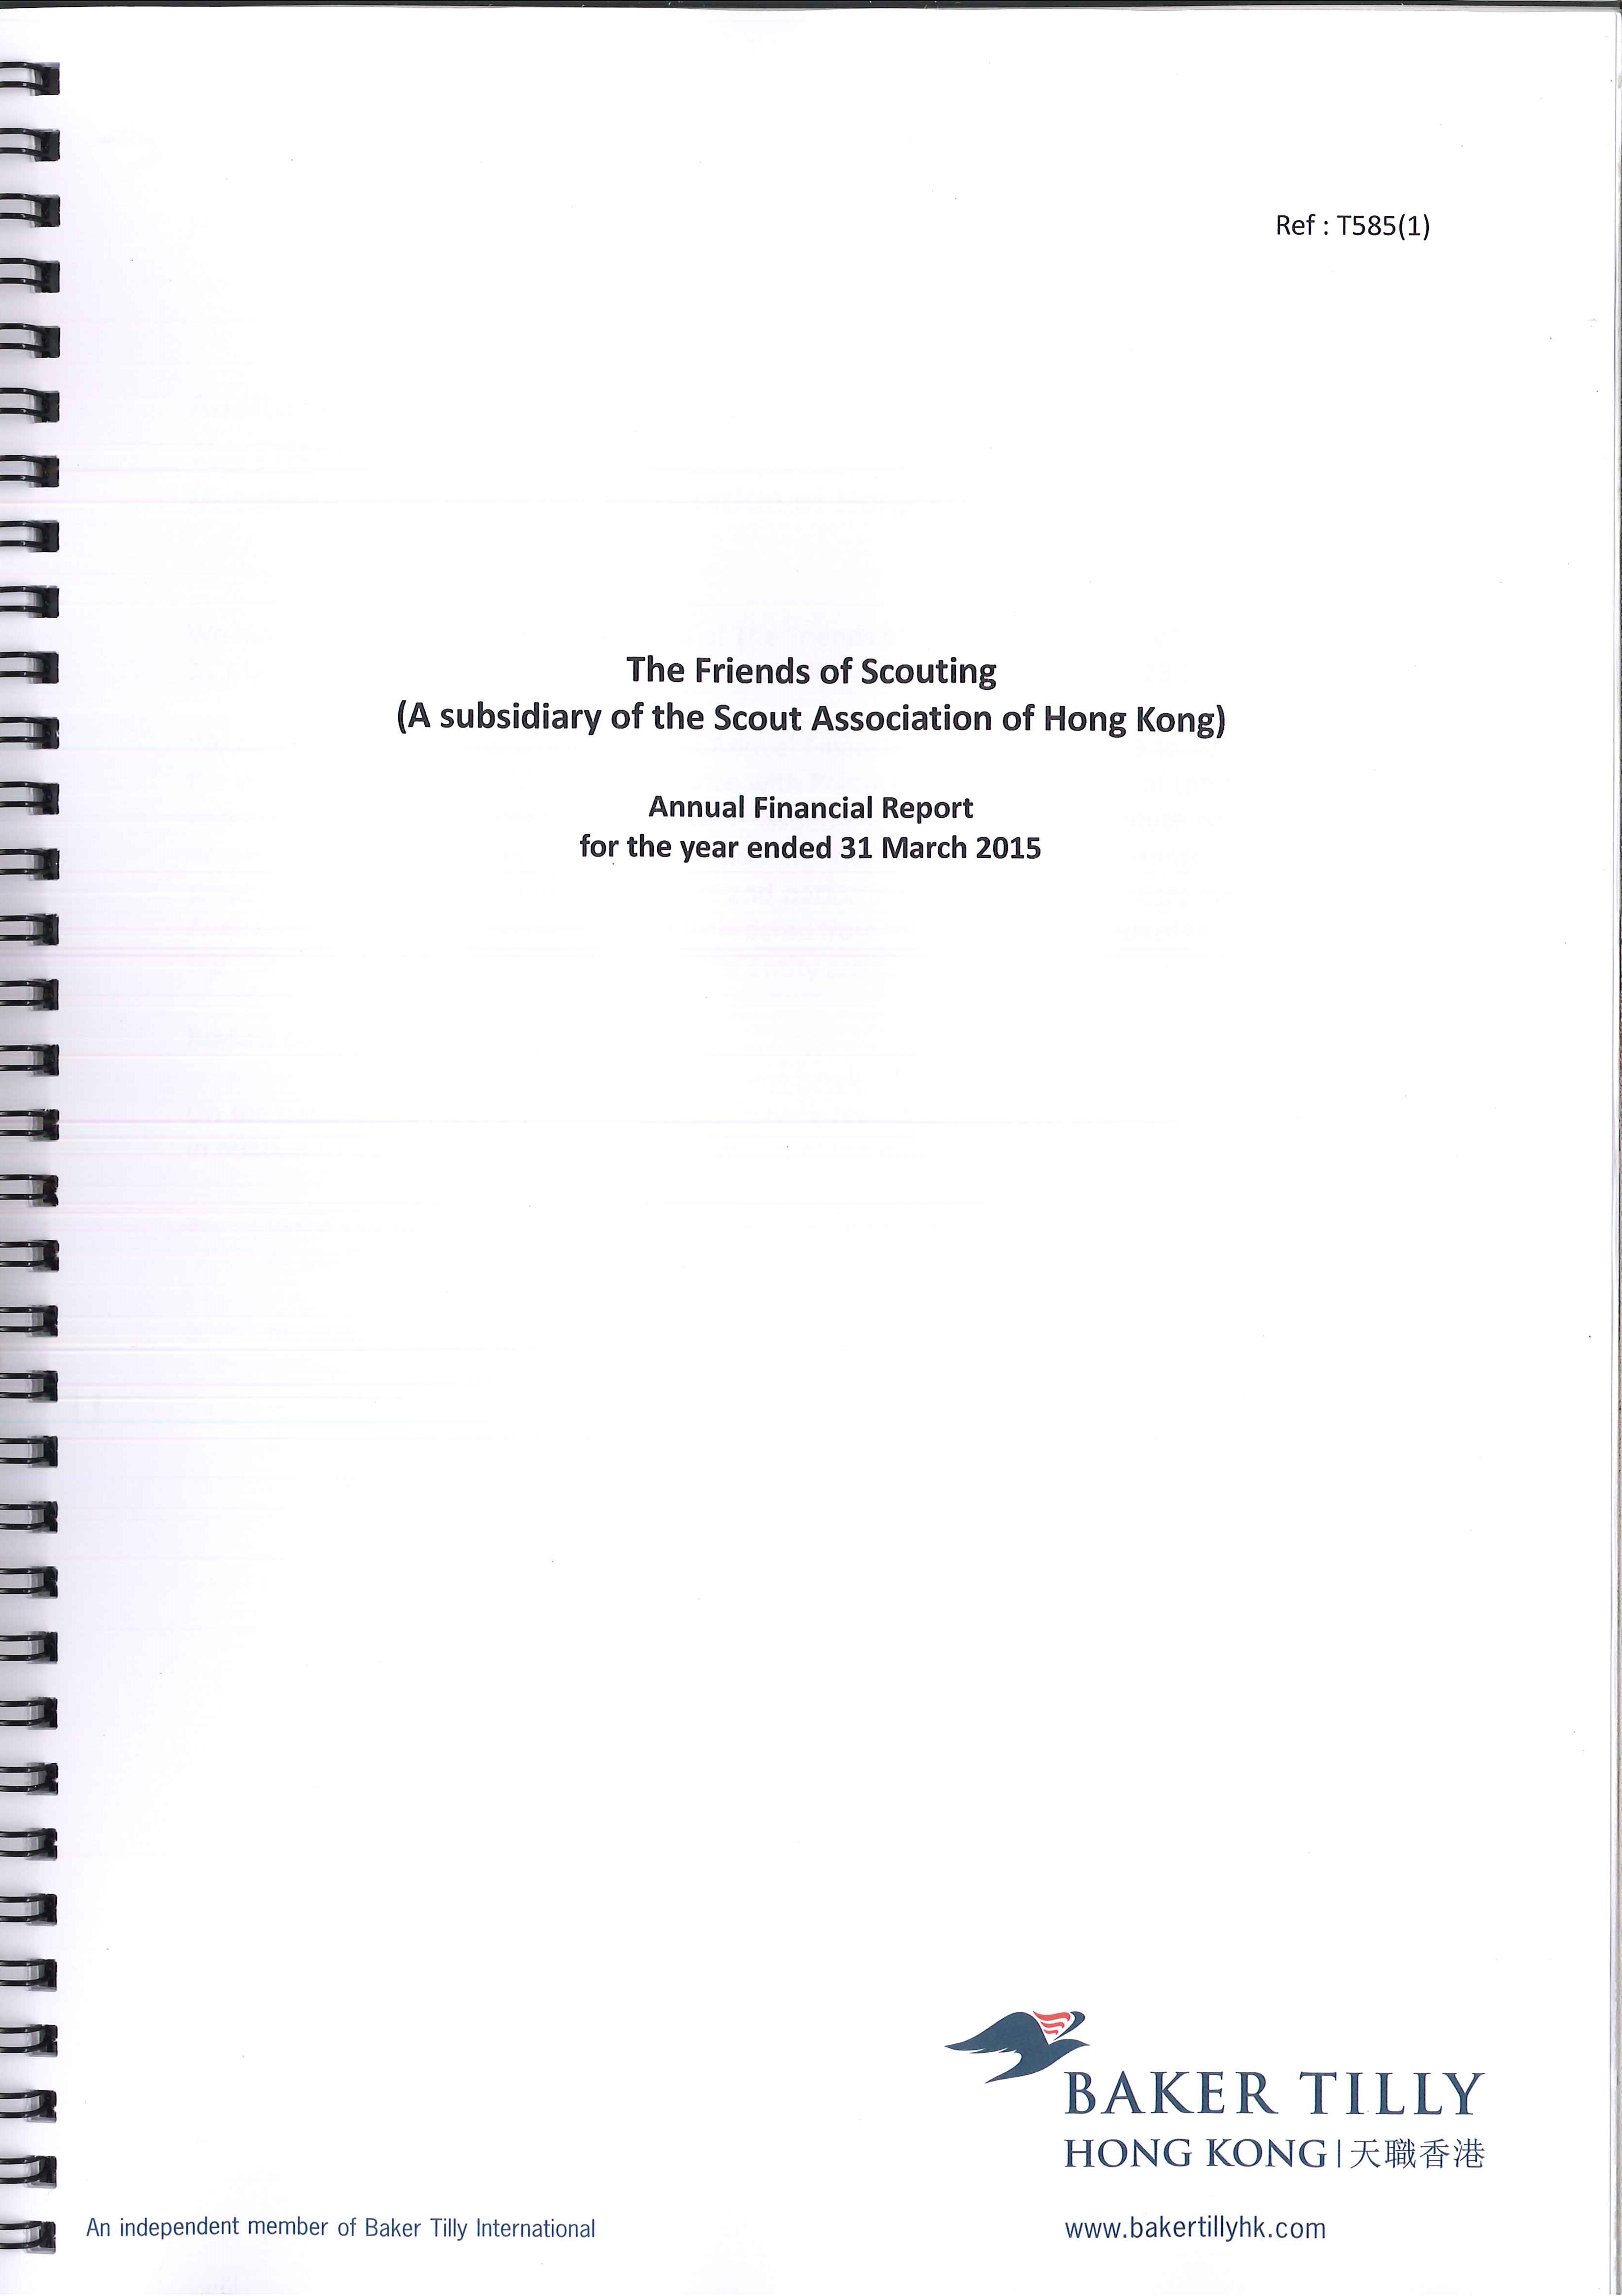 Annual Financial Report for the year ended 31 March 2015 (English Version Only)